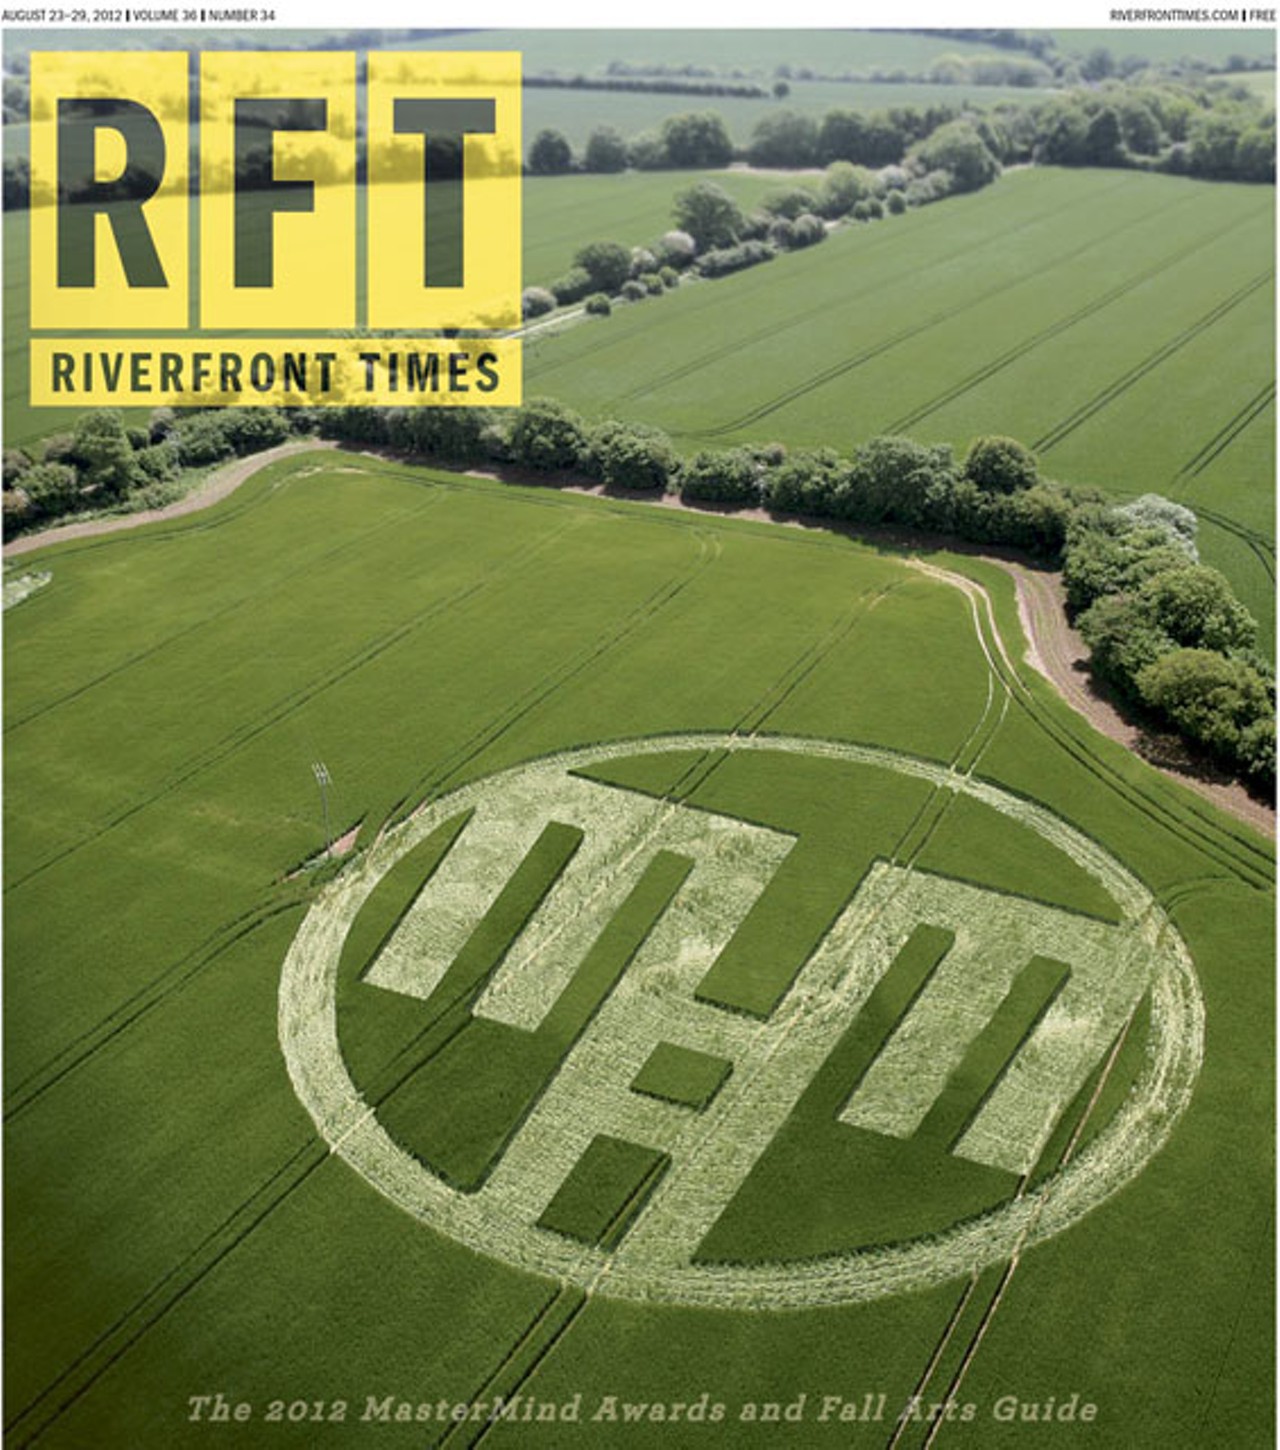 Introducing the 2012 Riverfront Times MasterMind Award Winners by the RFT staff in the August 23 issue. Cover: RFT Photo-Illustration.